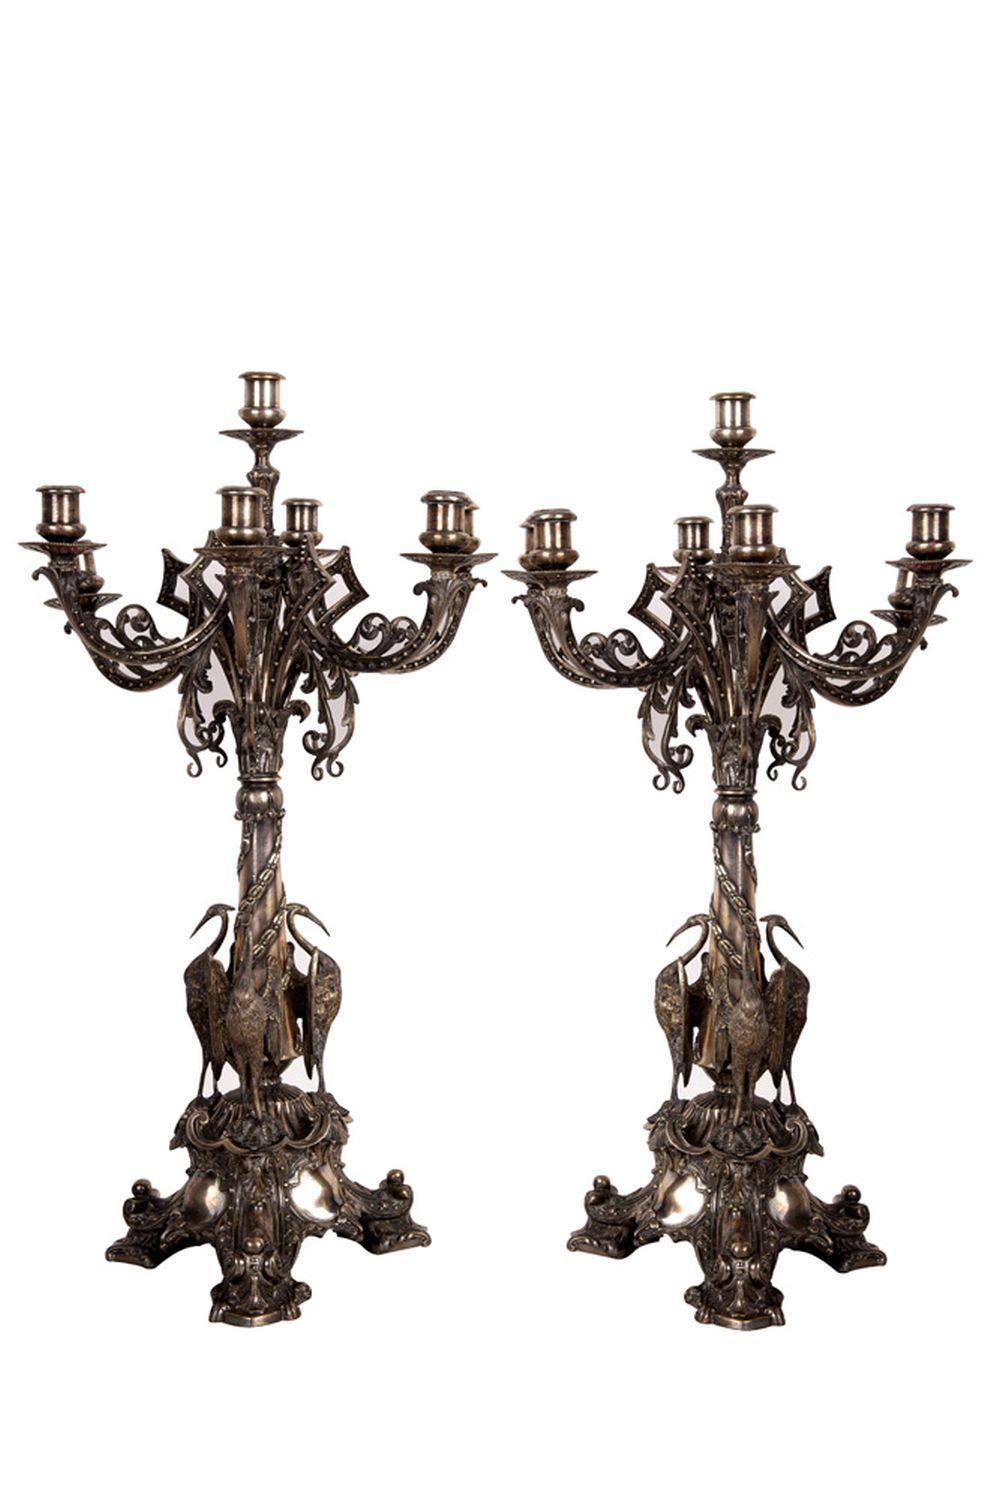 PAIR OF FRENCH SILVERED BRONZE